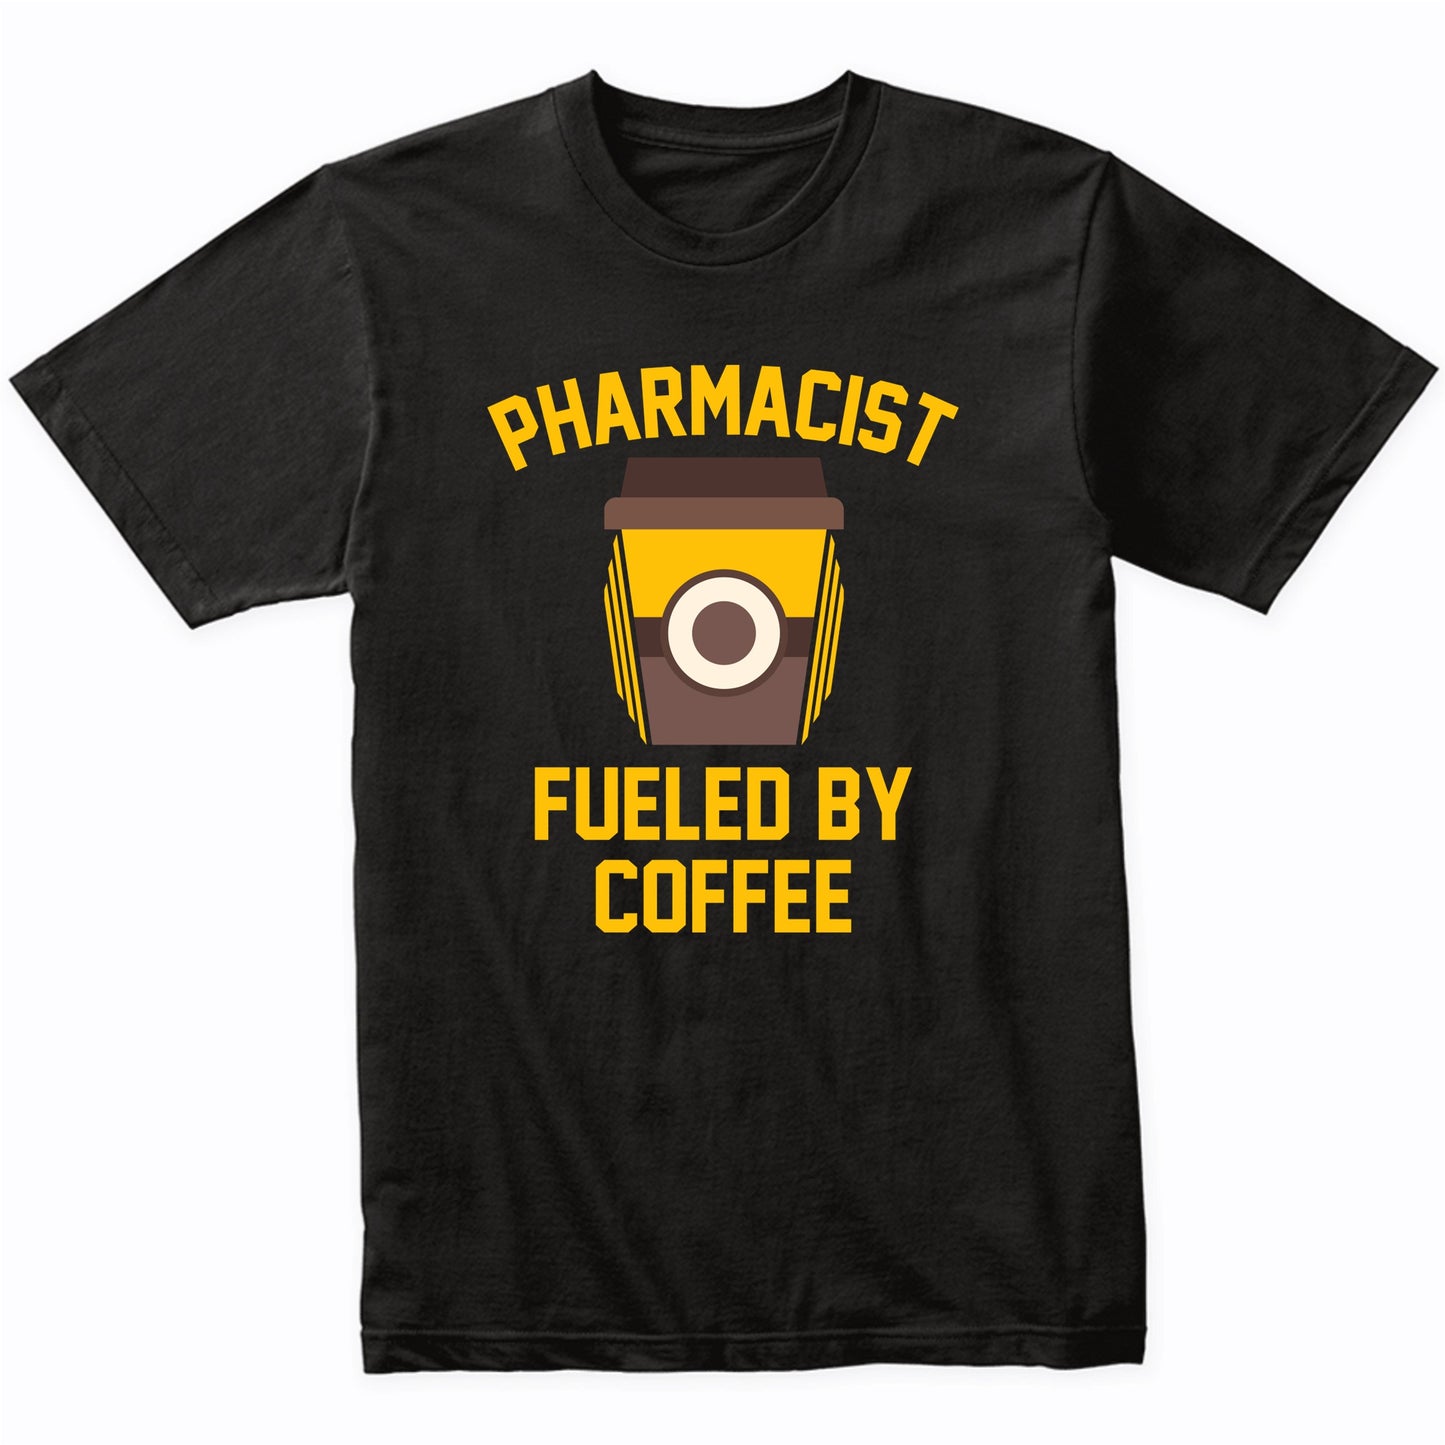 Pharmacist Fueled By Coffee Funny Shirt